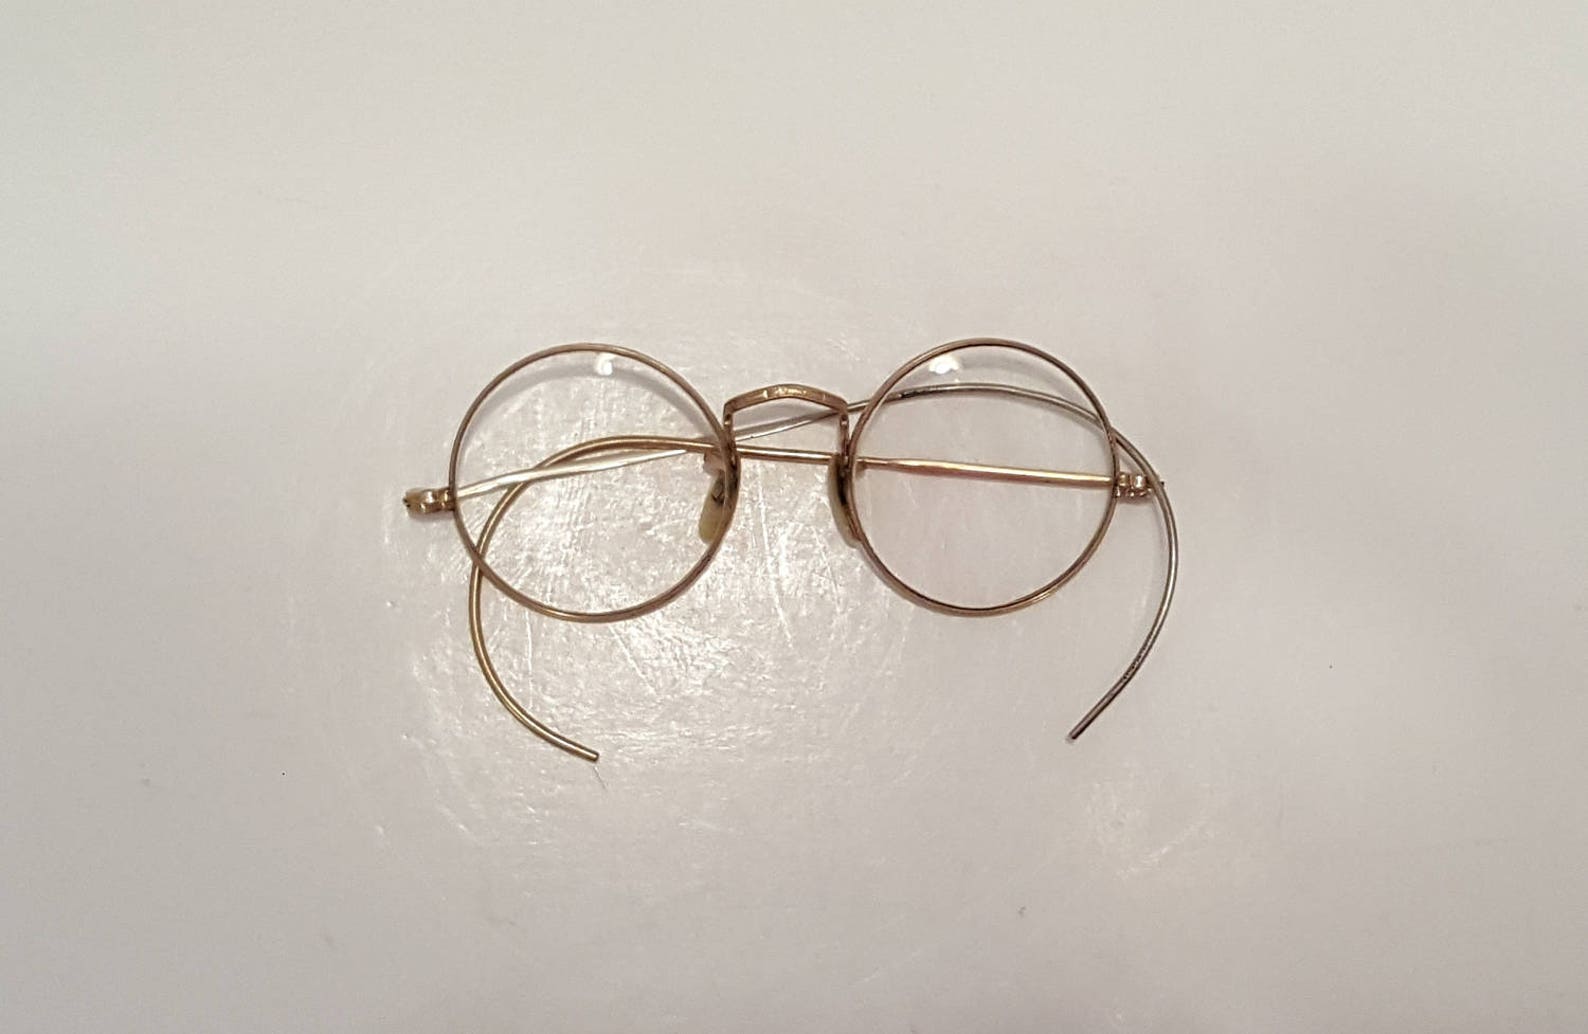 Antique Round Wire Rimmed Glasses 12k Gold Filled Steampunk Etsy